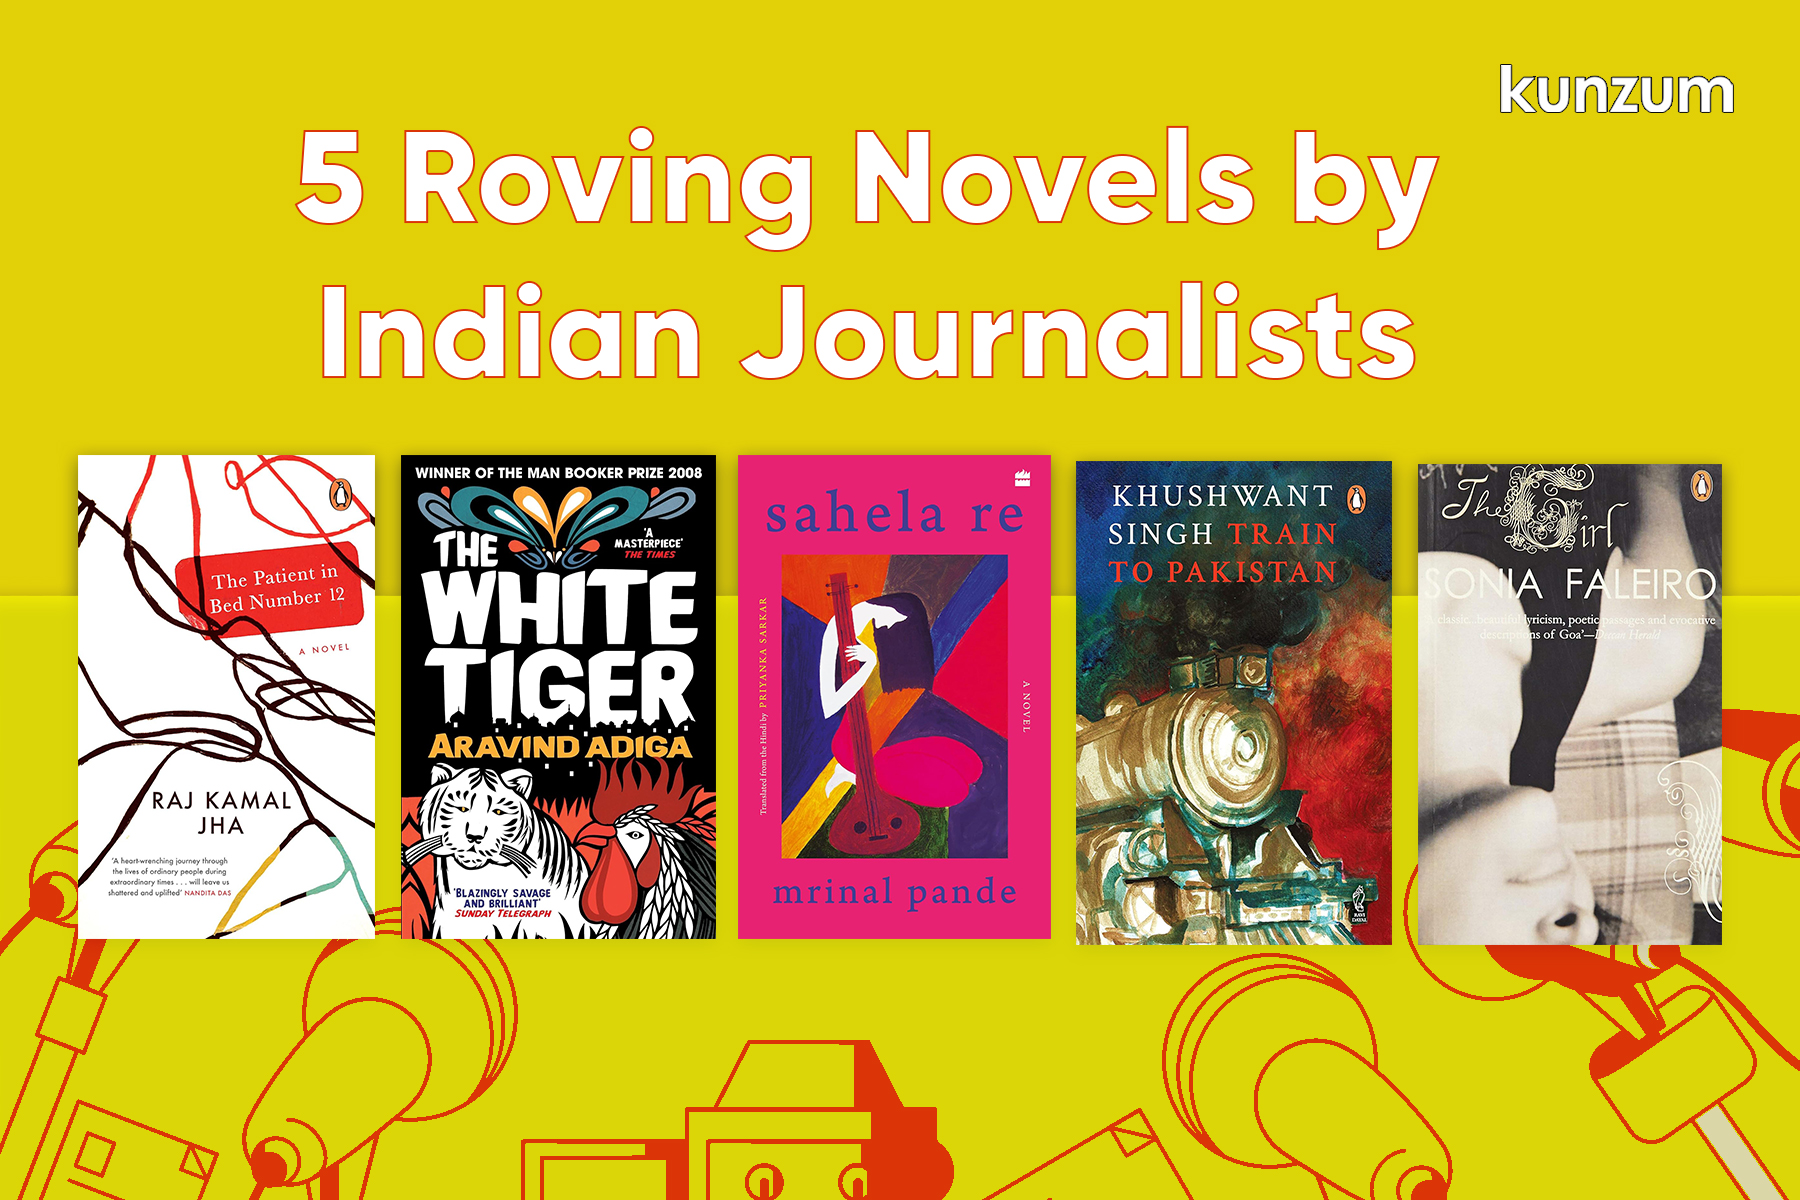 5 Roving Novels by Indian Journalists